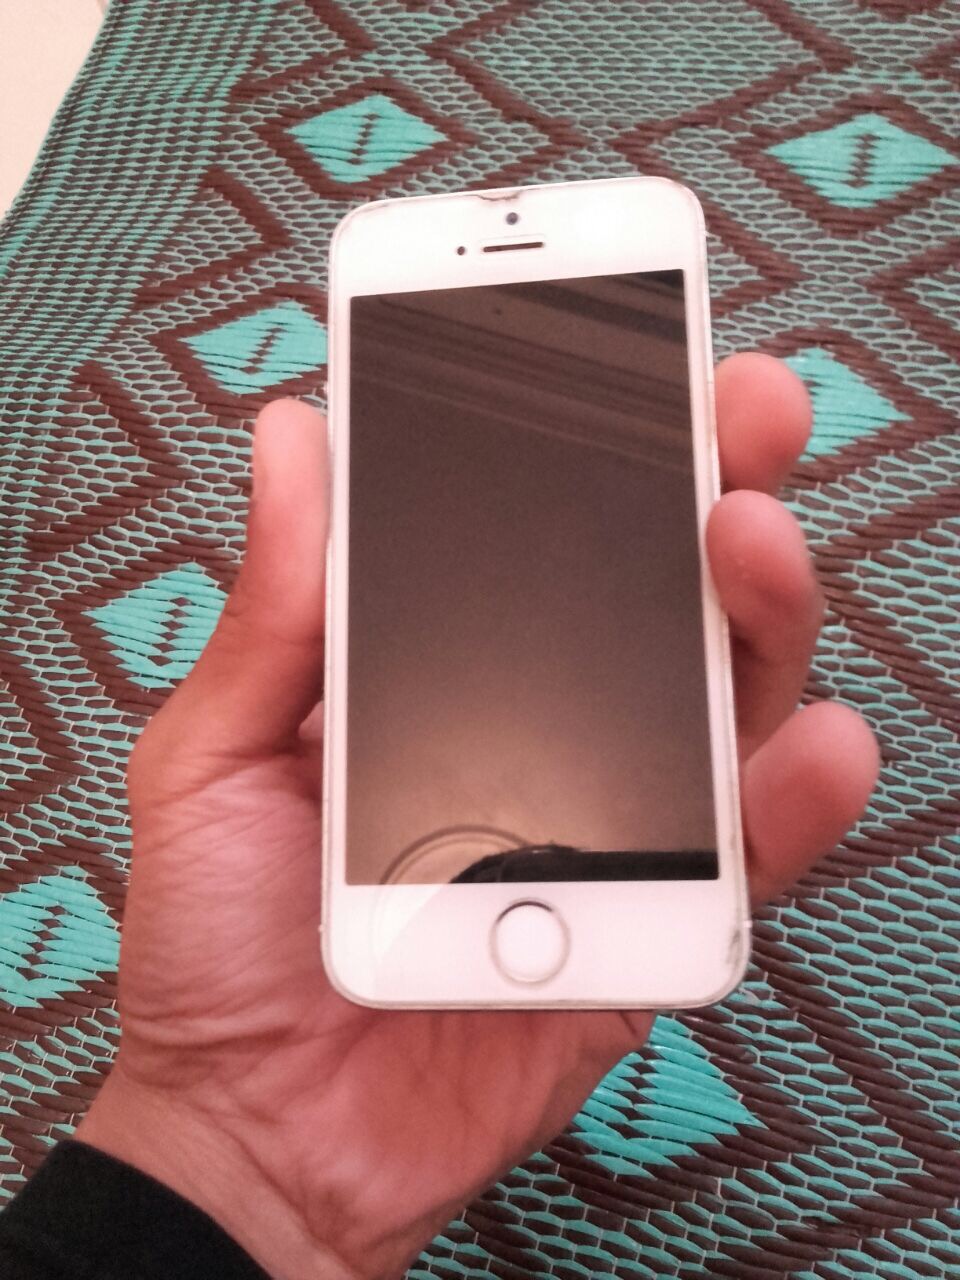 Iphone 5s 16GB silver